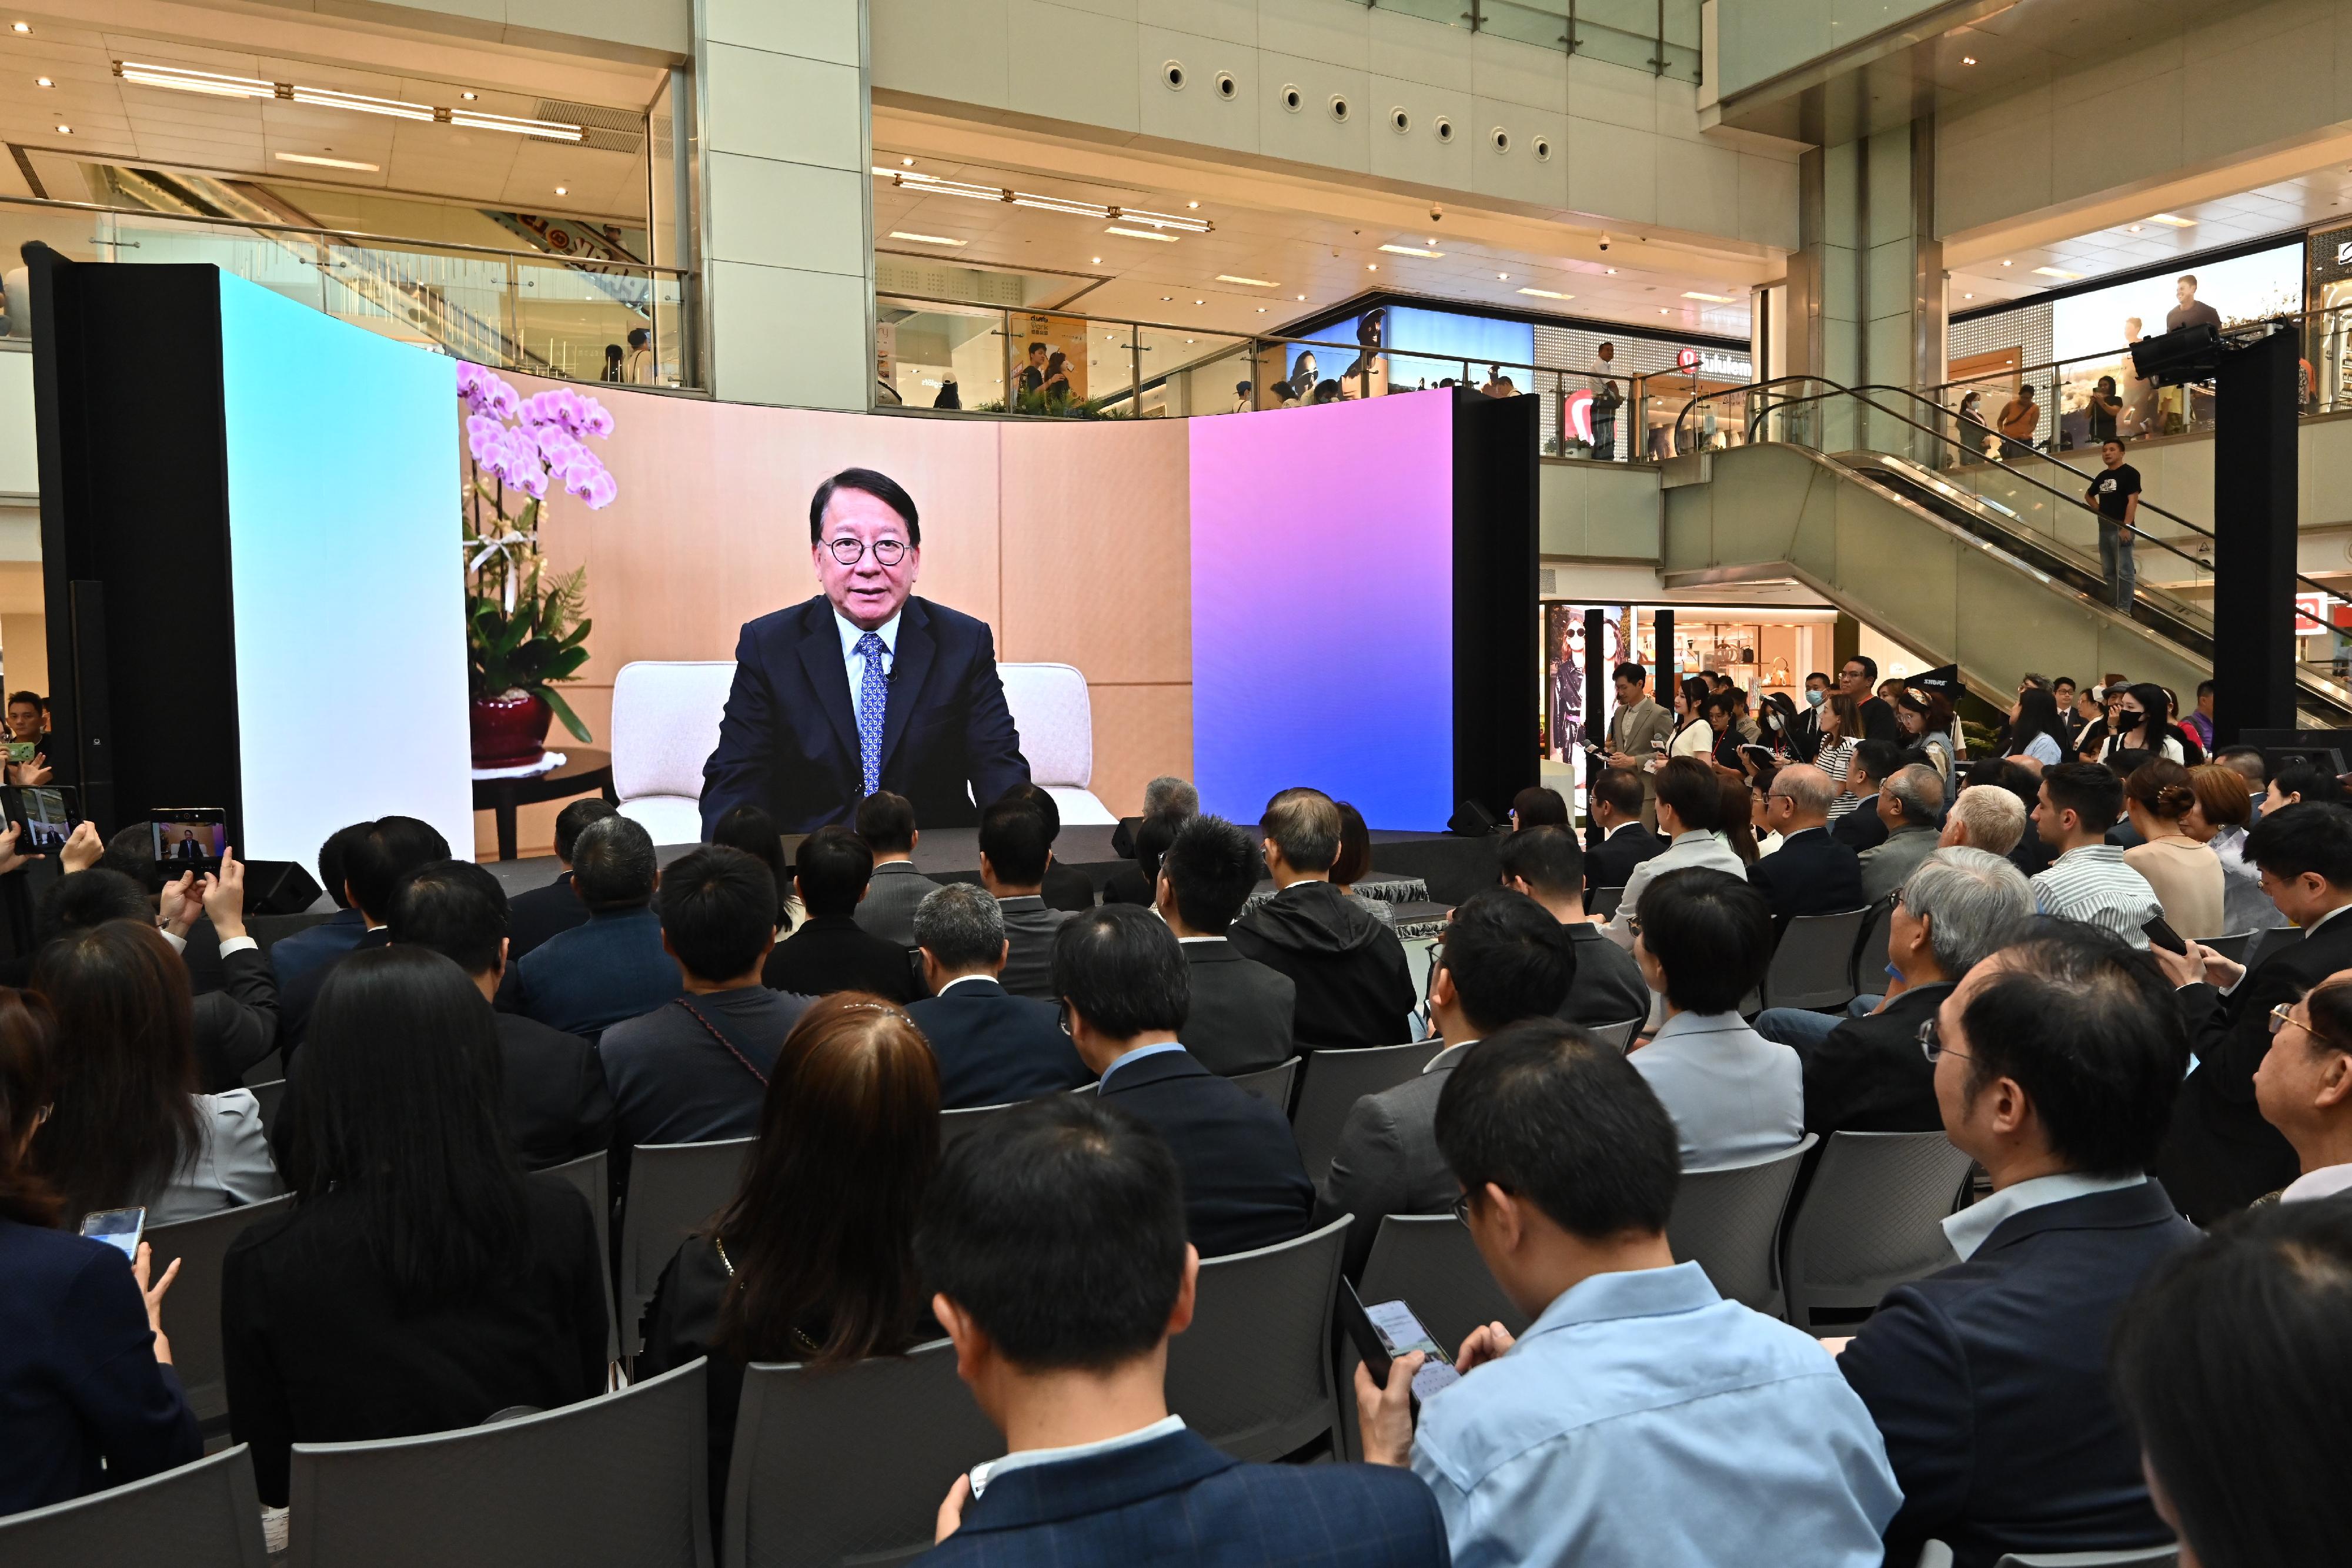 The Hong Kong Public Libraries of the Leisure and Cultural Services Department and the Hong Kong Publishing Federation today (April 20) jointly held the opening ceremony of Hong Kong Reading Week and the 2024 Hong Kong Reading+ at New Town Plaza in Sha Tin. Photo shows the Chief Secretary for Administration, Mr Chan Kwok-ki, delivering a video speech at the opening ceremony.
